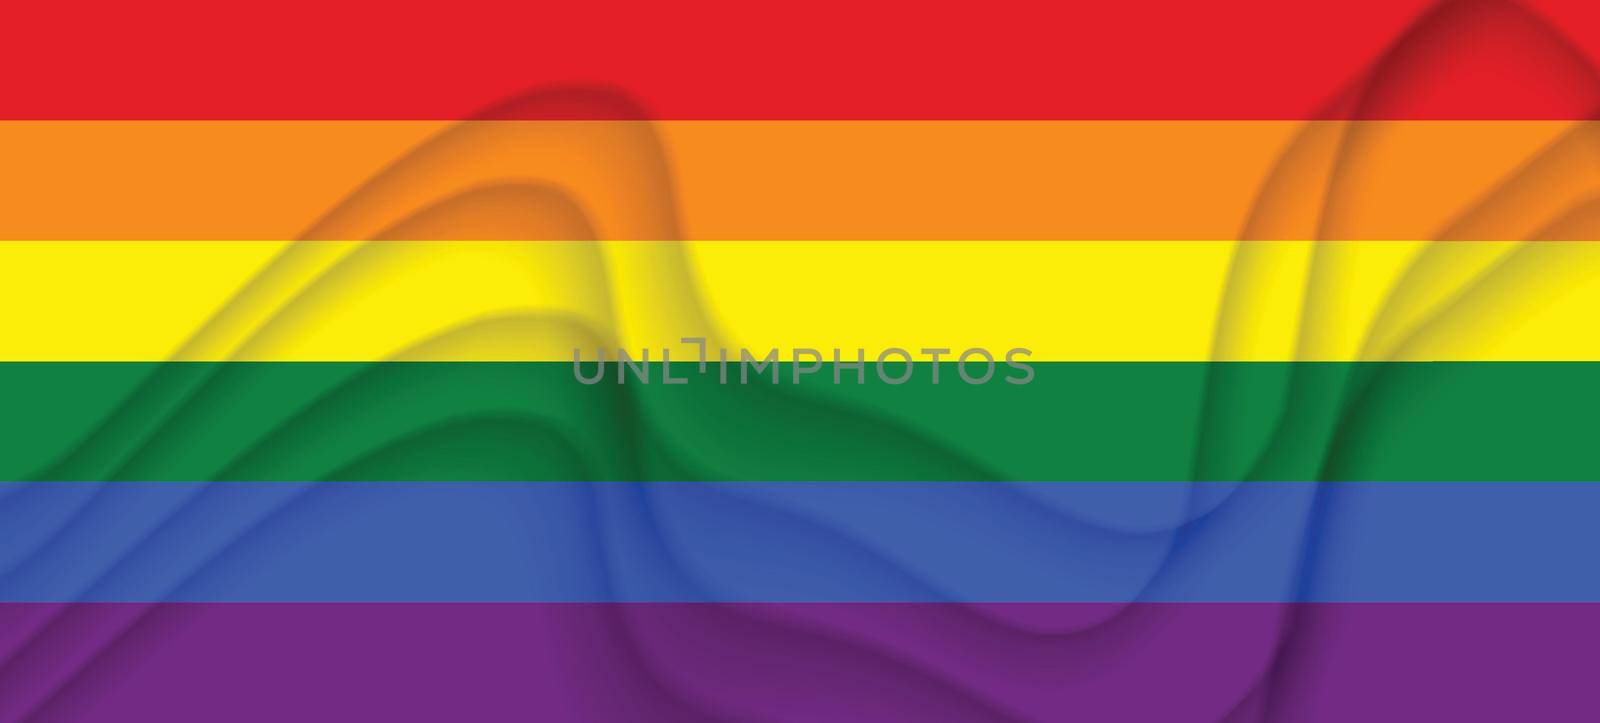 Flag LGBT squared icon, badge or button. Template design, vector illustration. Love wins. LGBT symbol in rainbow colors. Gay pride silk textile background.